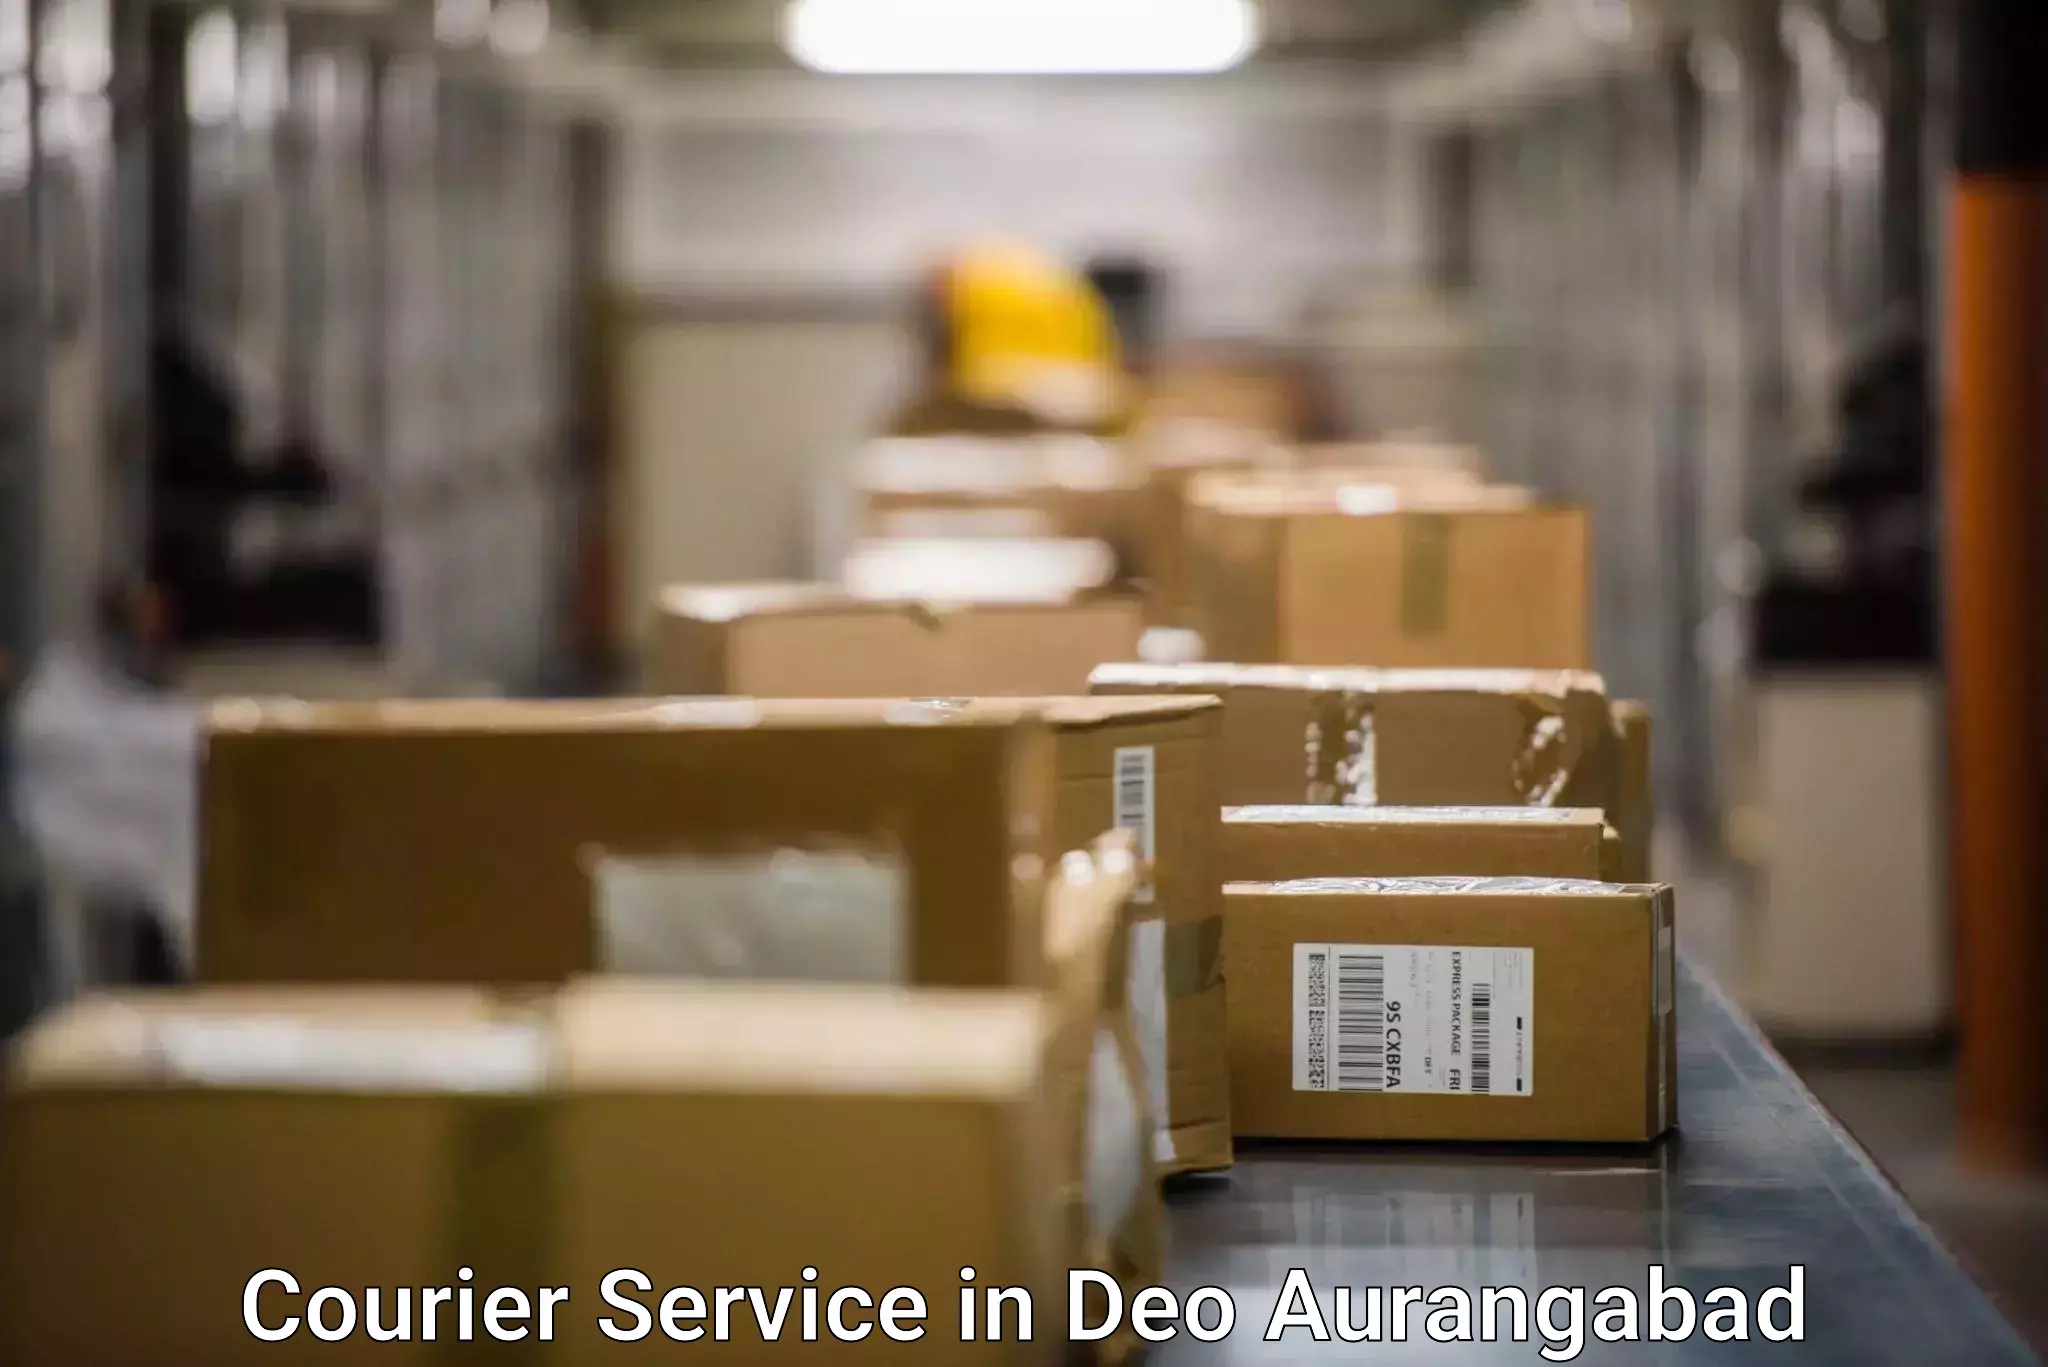 Fast shipping solutions in Deo Aurangabad